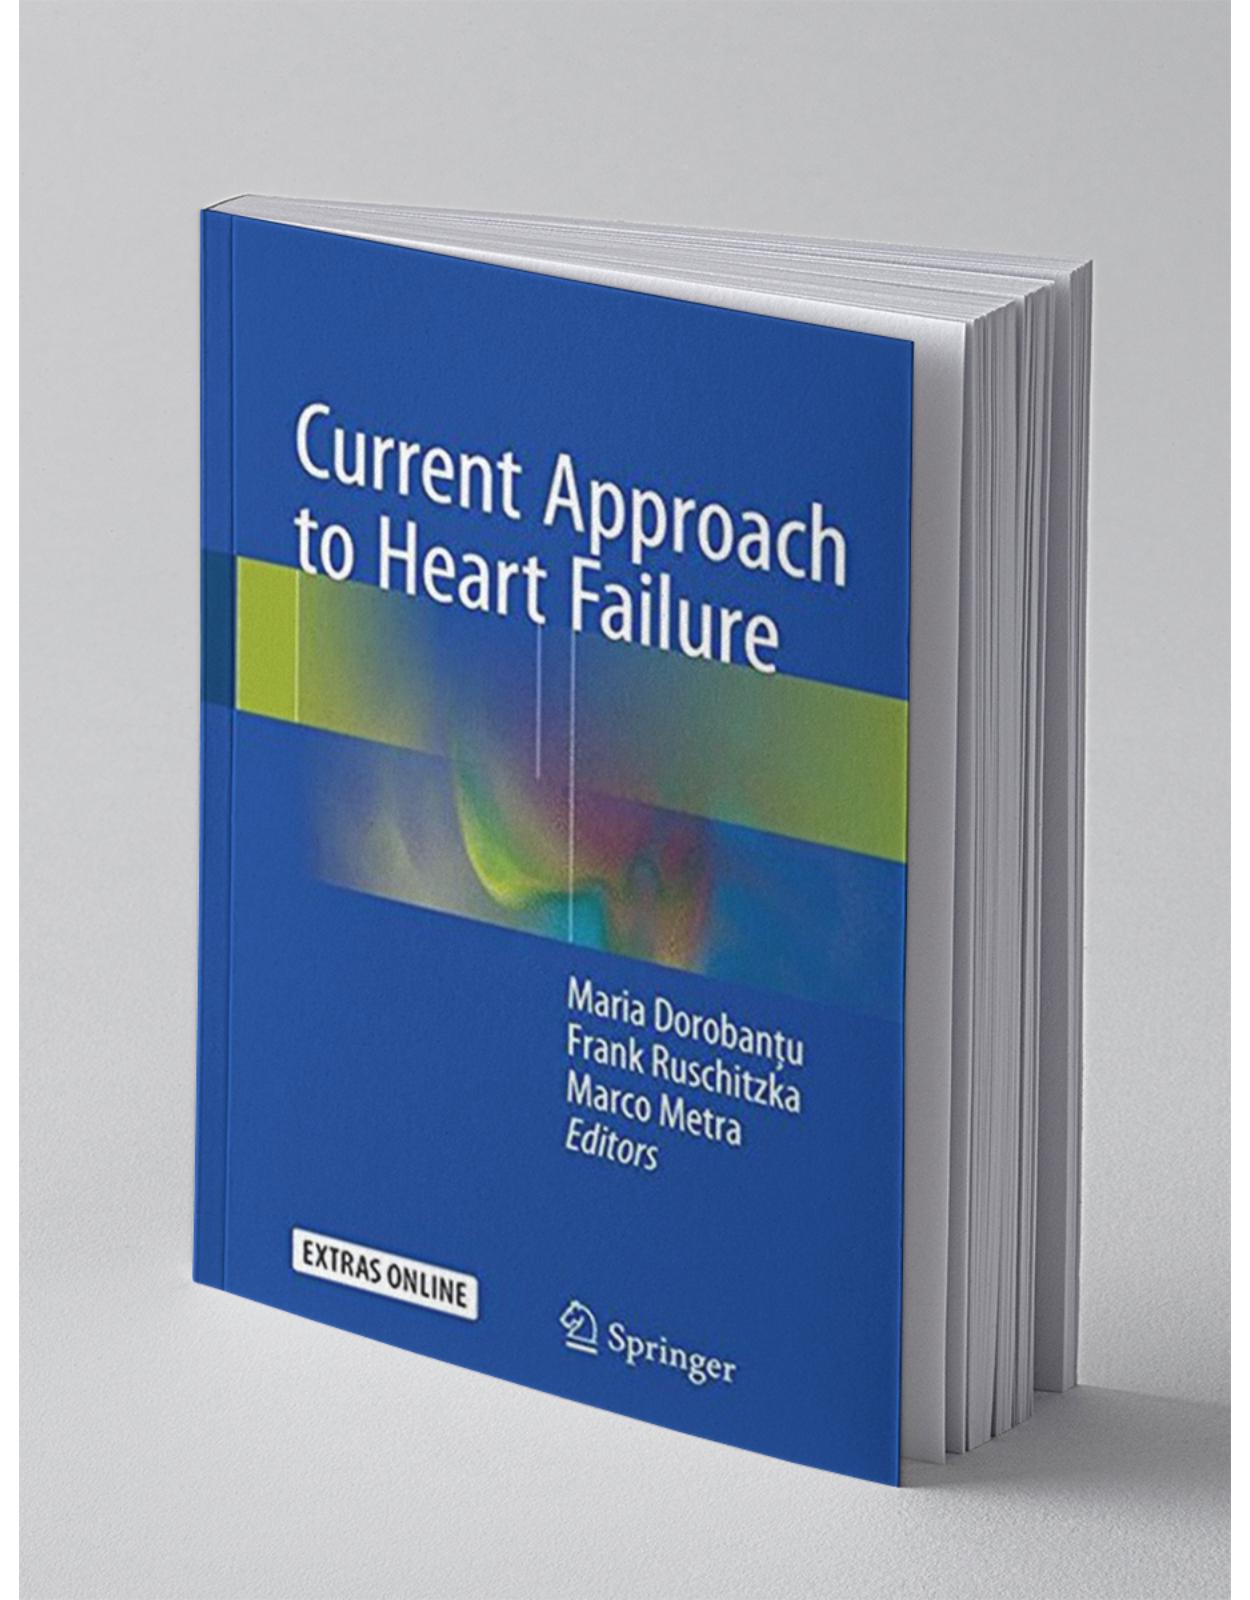 Current Approach to Heart Failure